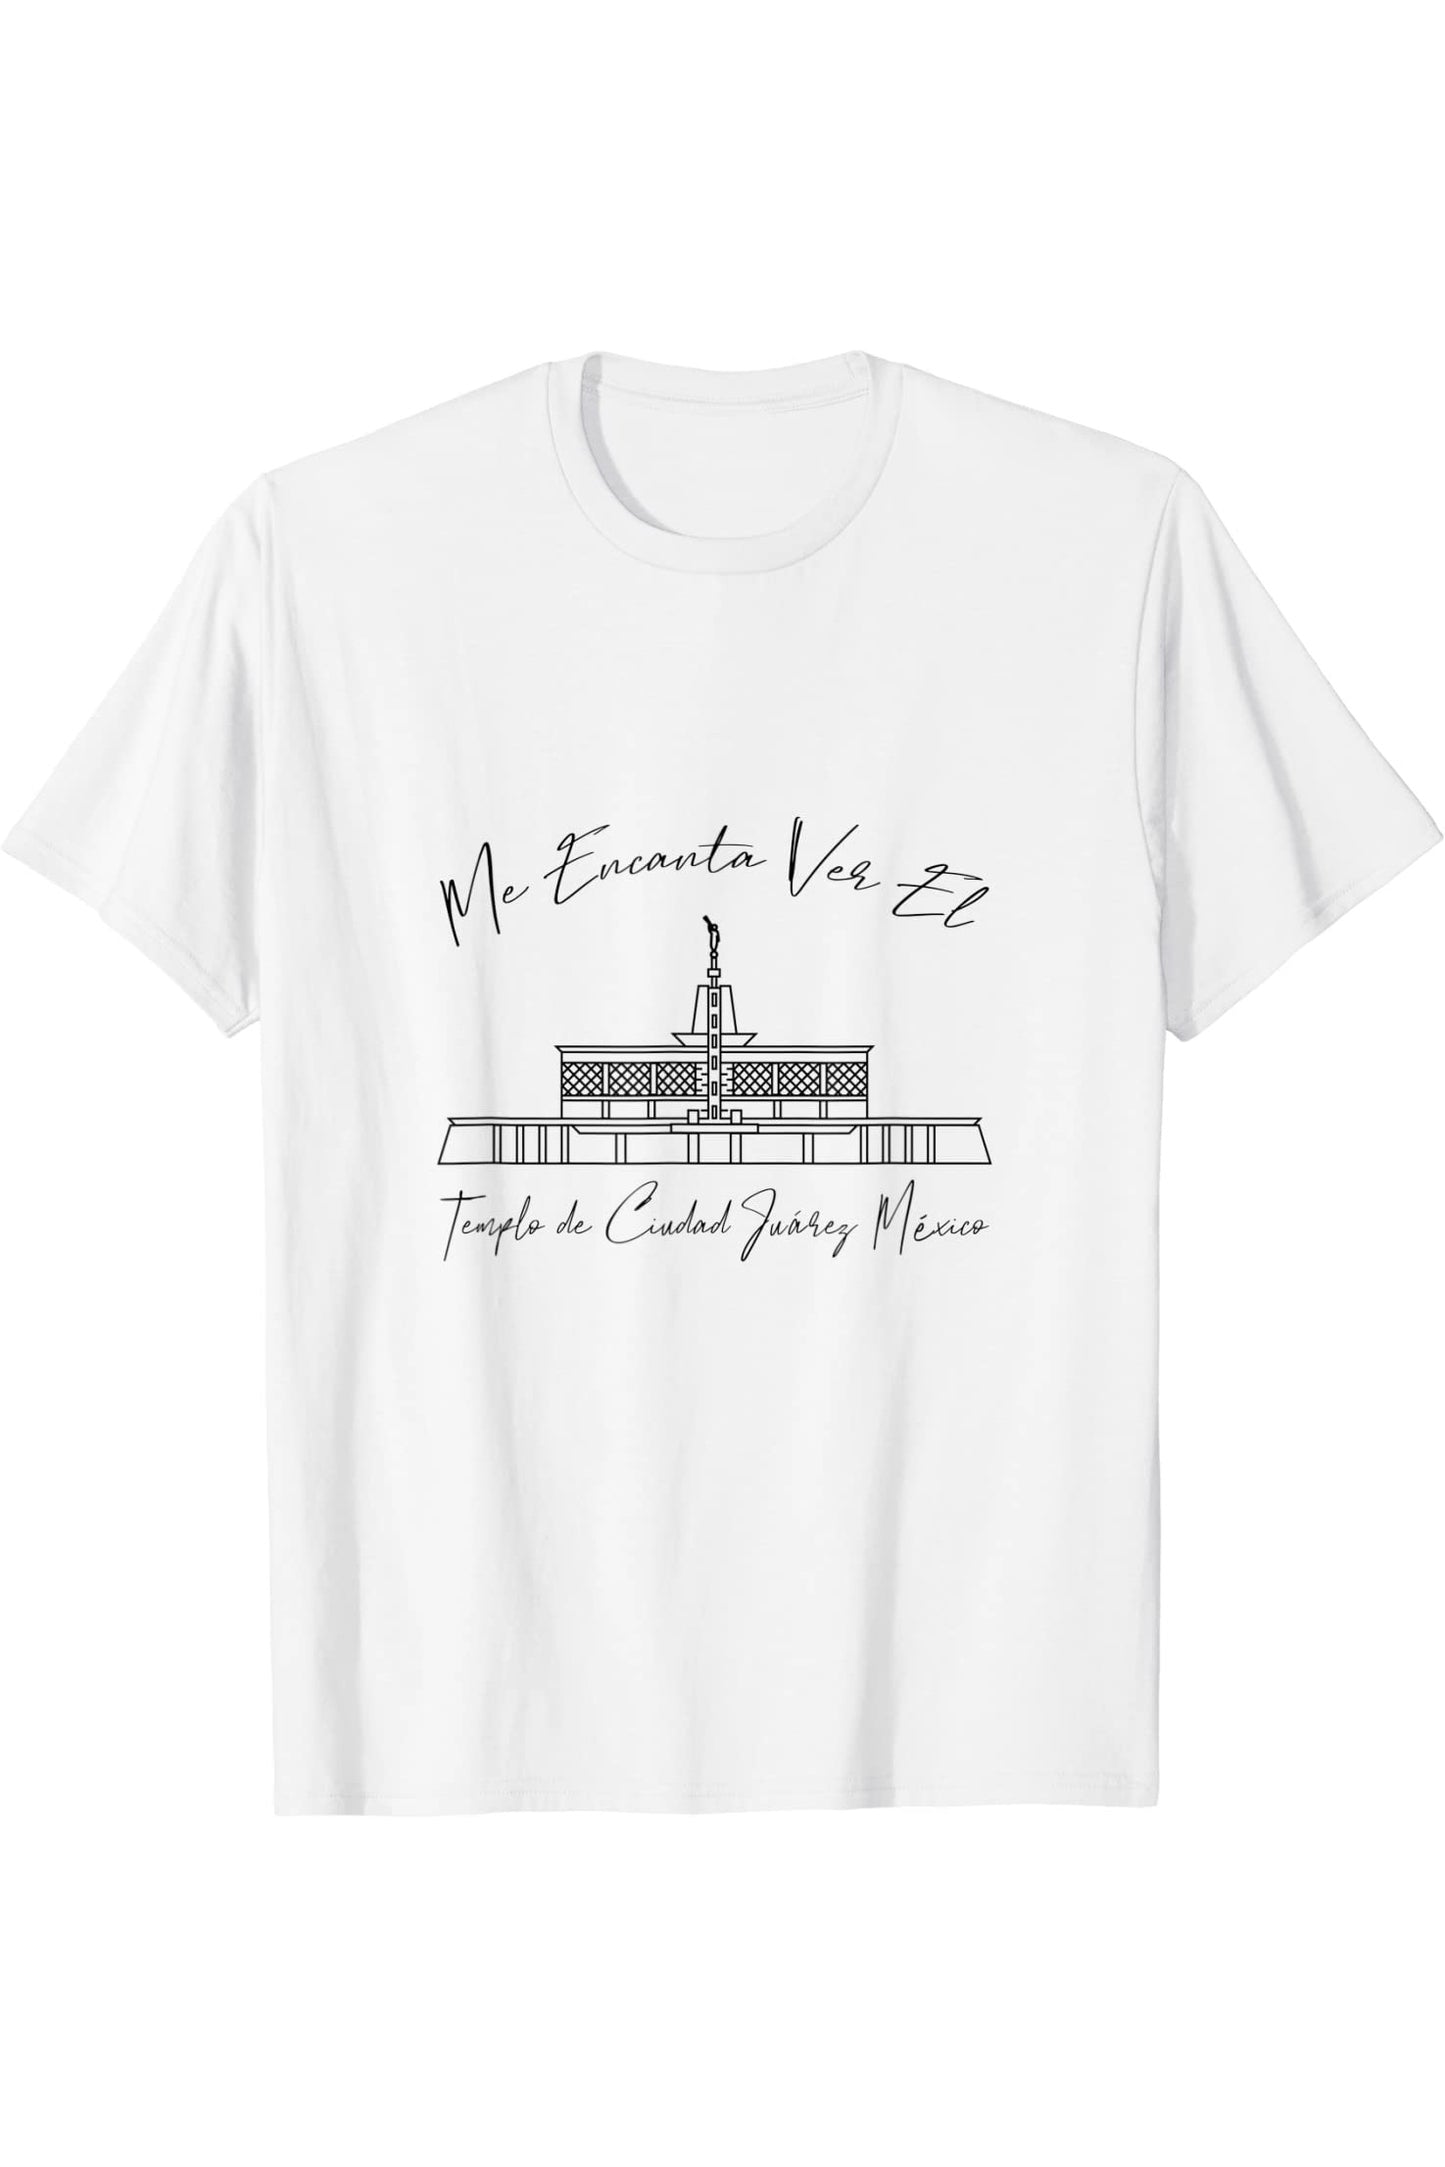 Mexico City Mexico Temple T-Shirt - Calligraphy Style (Spanish) US